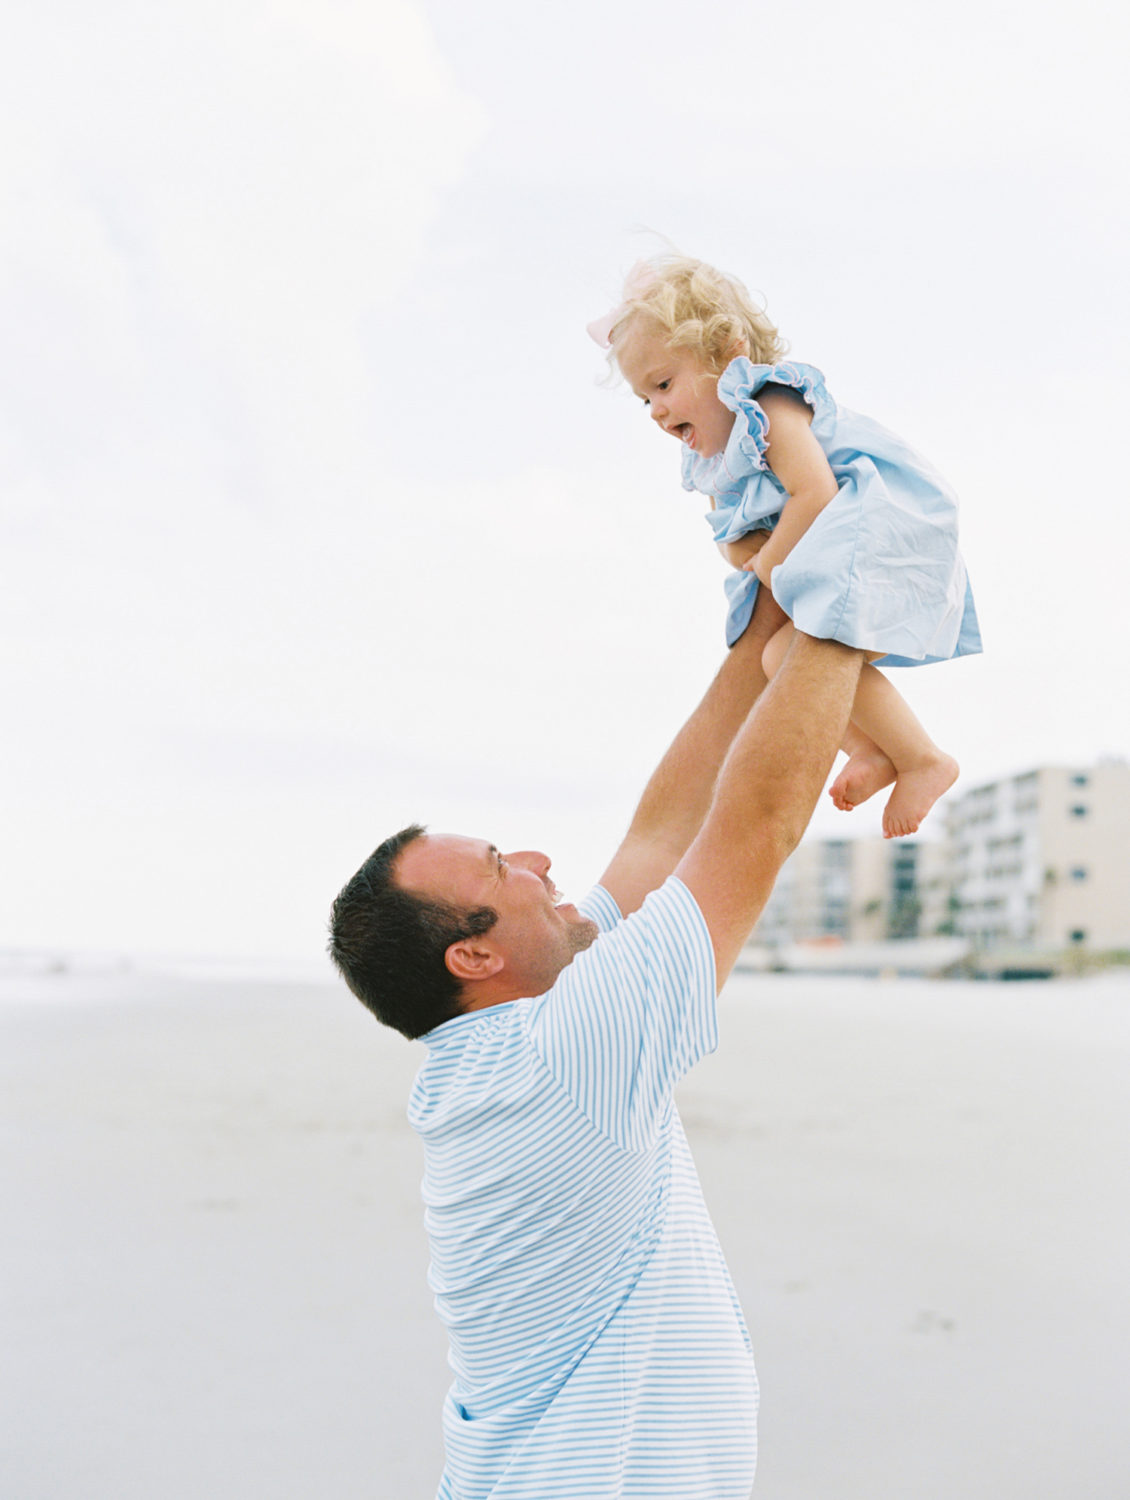 dad in blue shirt lifting toddler in blue dress into the air and both laughing